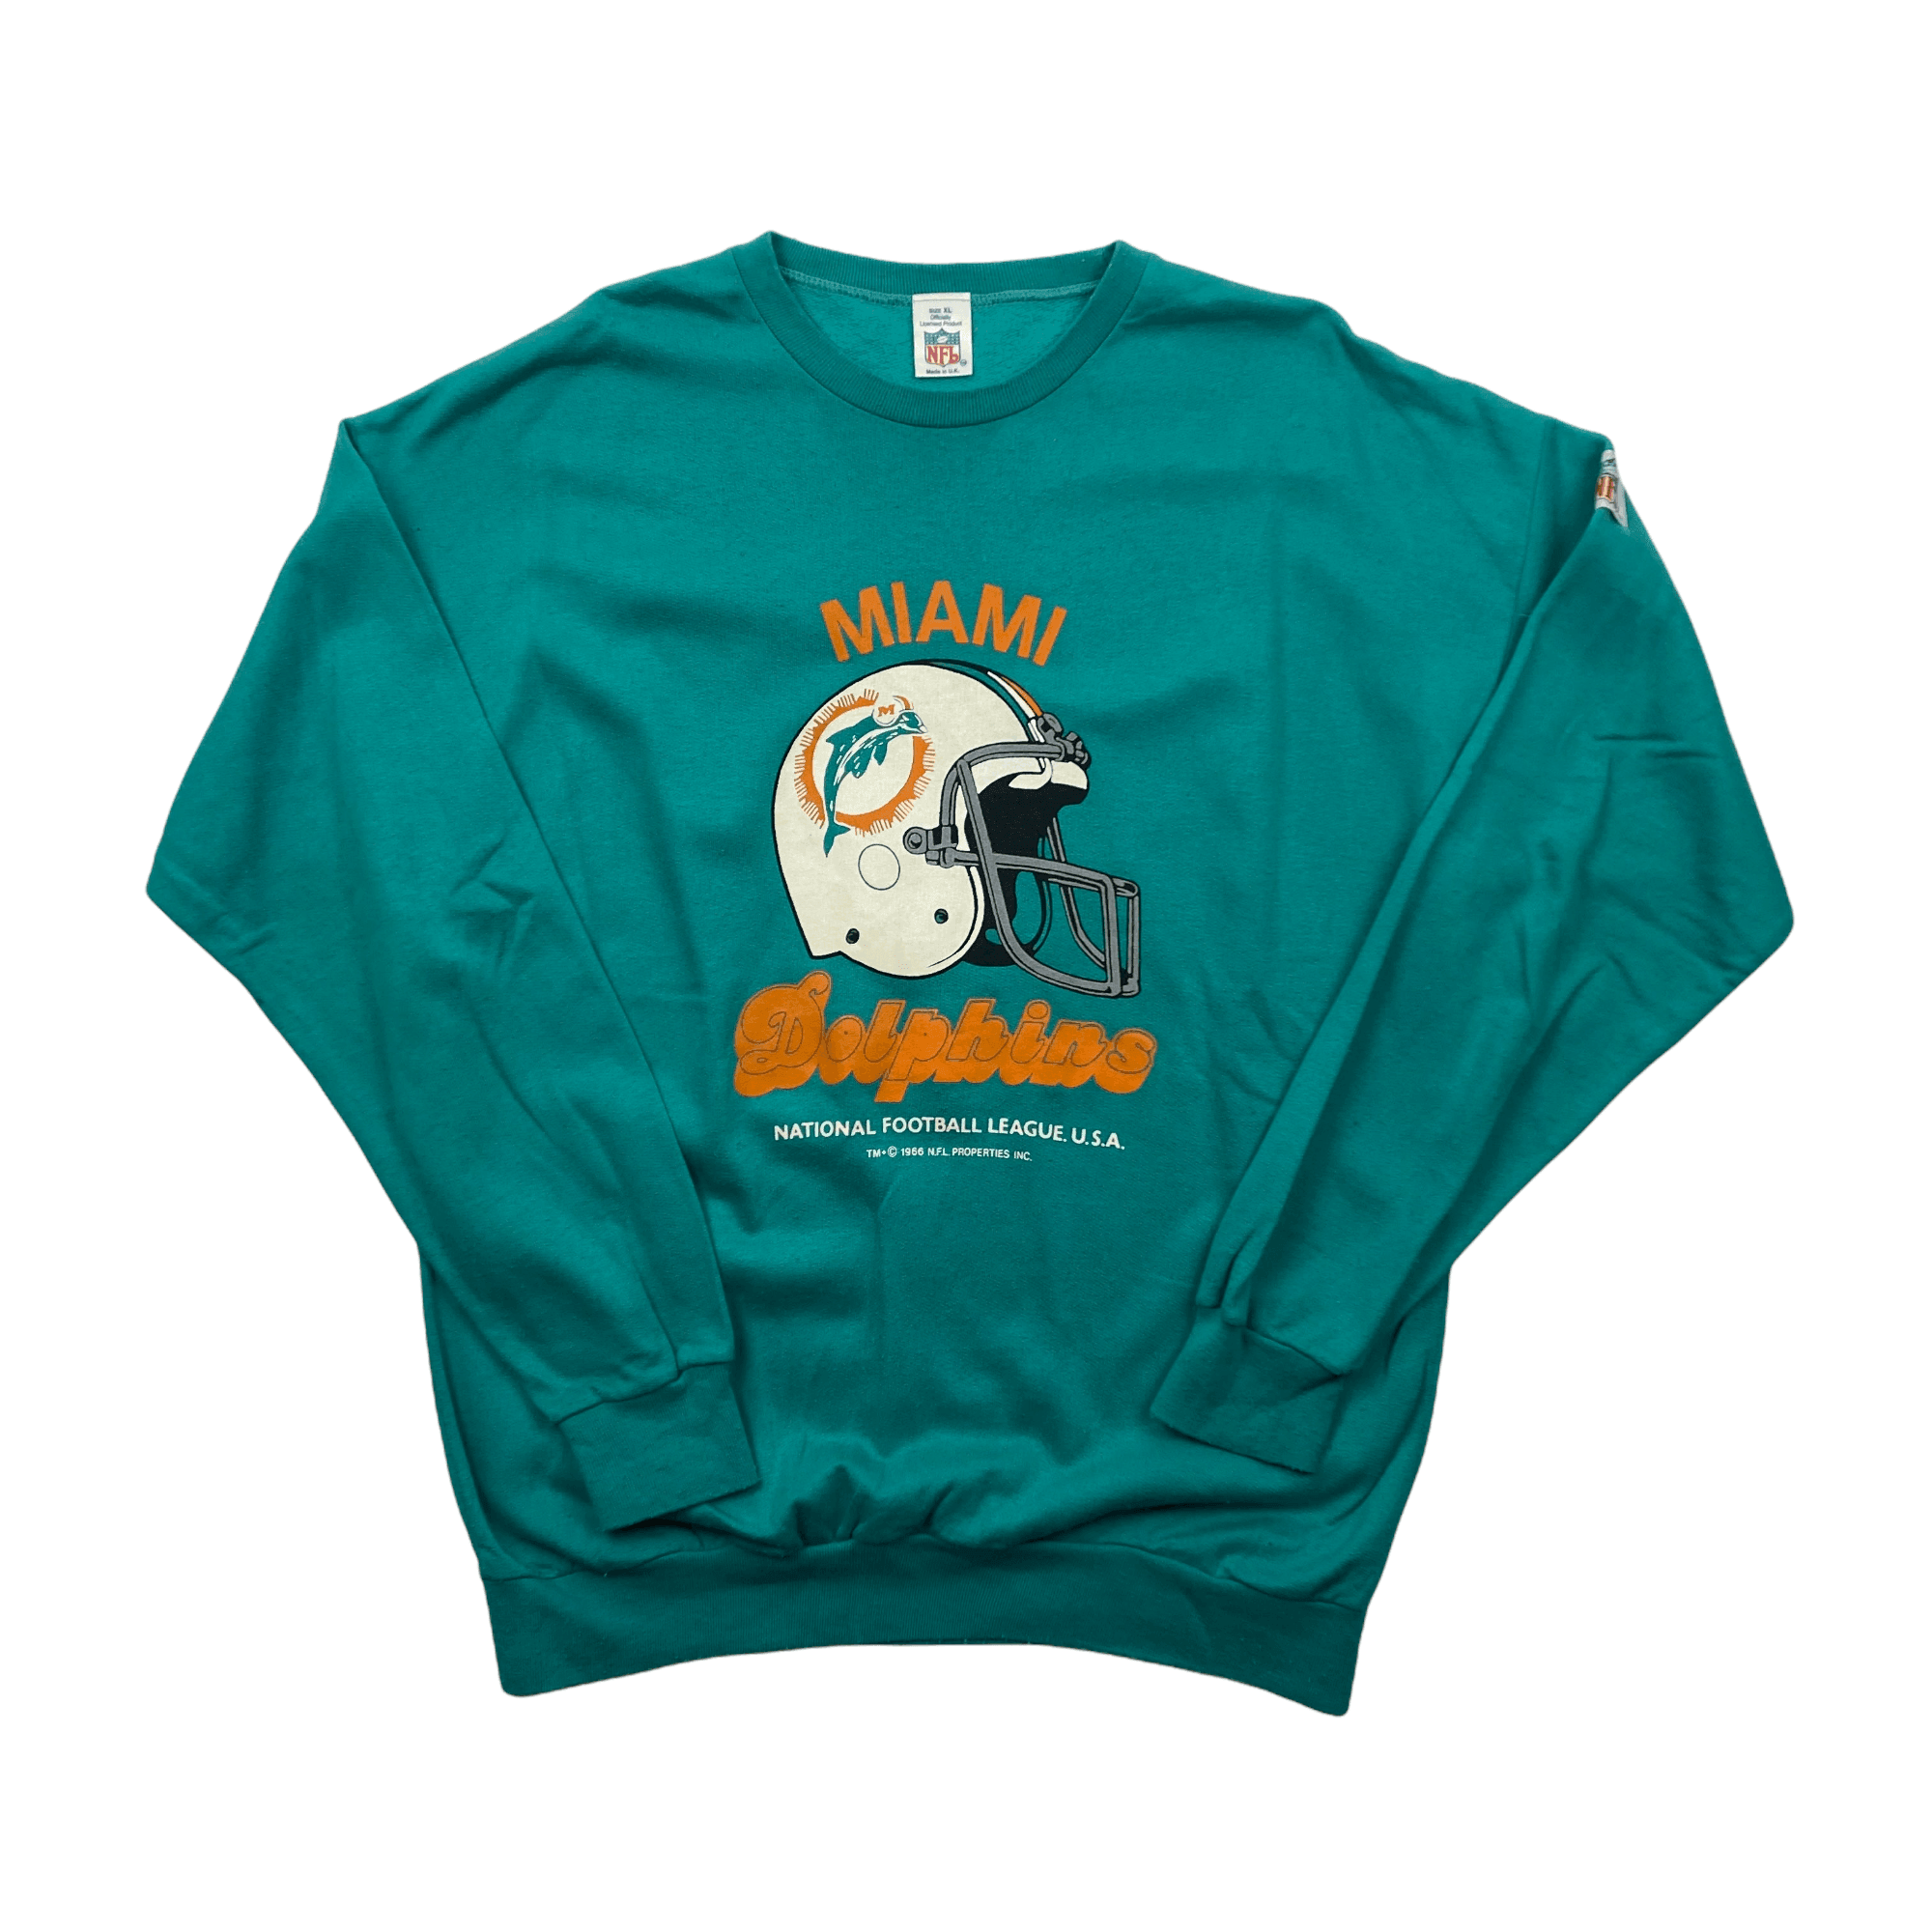 Vintage 60s Blue NFL Miami Dolphins Spell-Out Sweatshirt - Extra Large - The Streetwear Studio